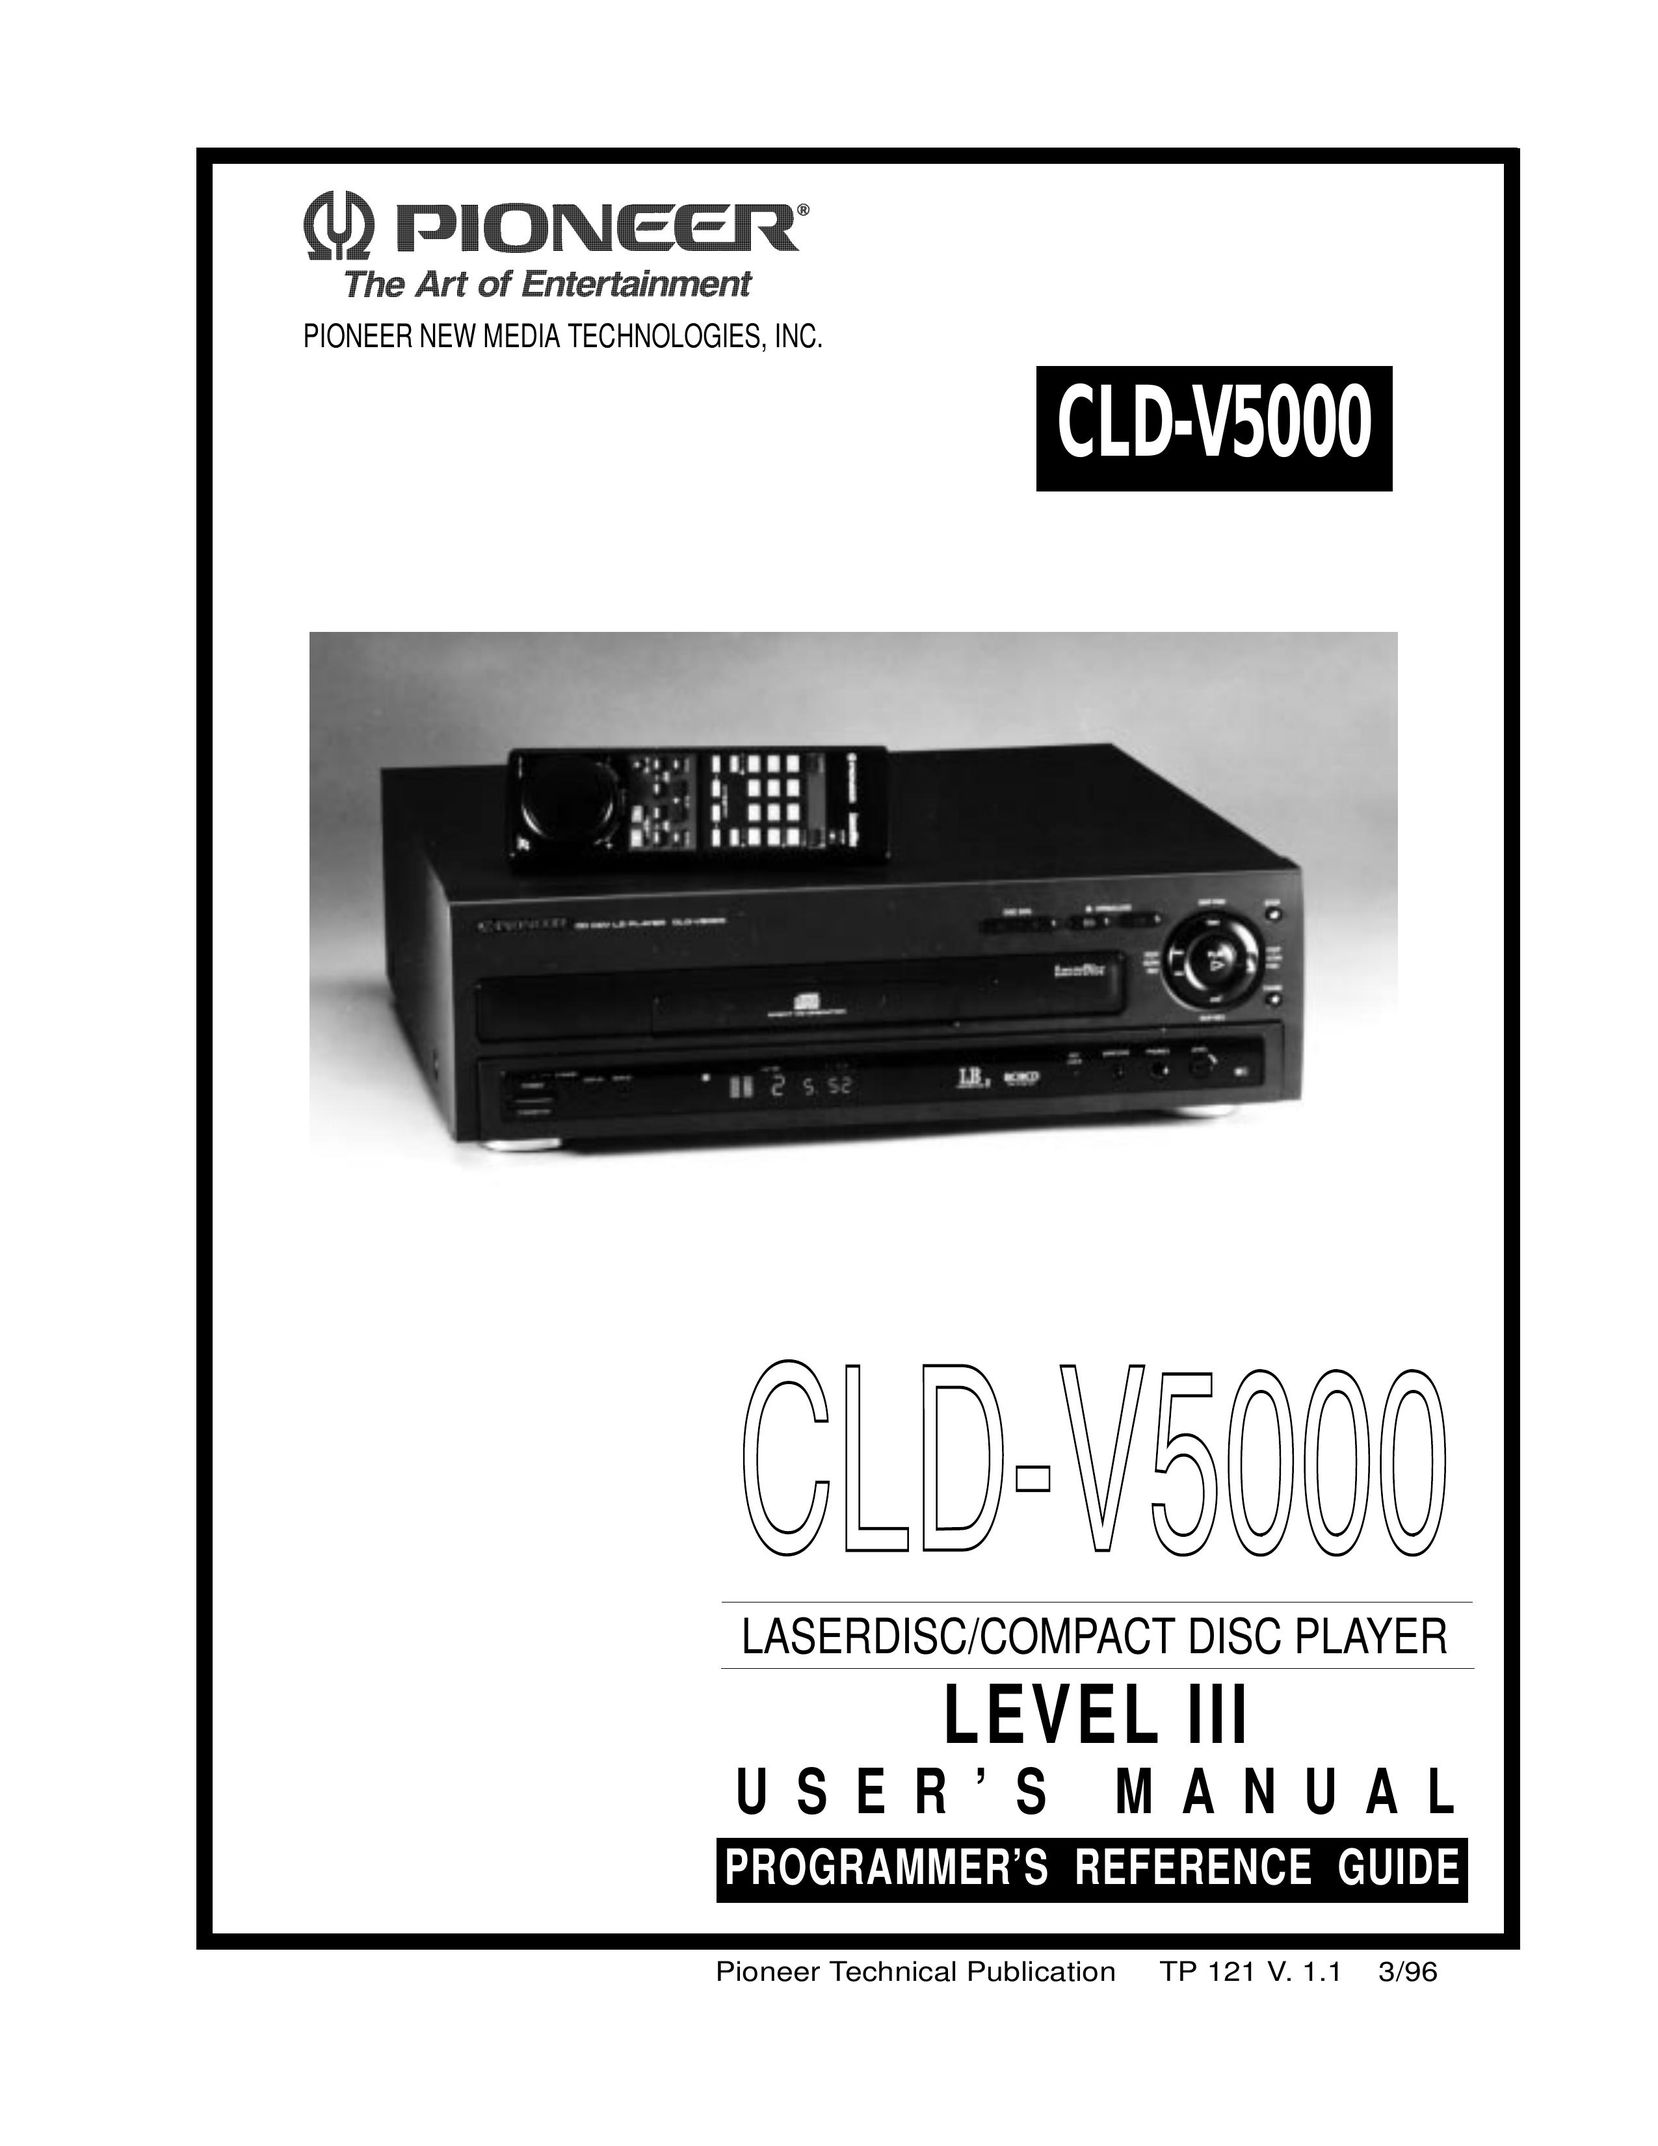 Pioneer CLD-V5000 DVD Player User Manual